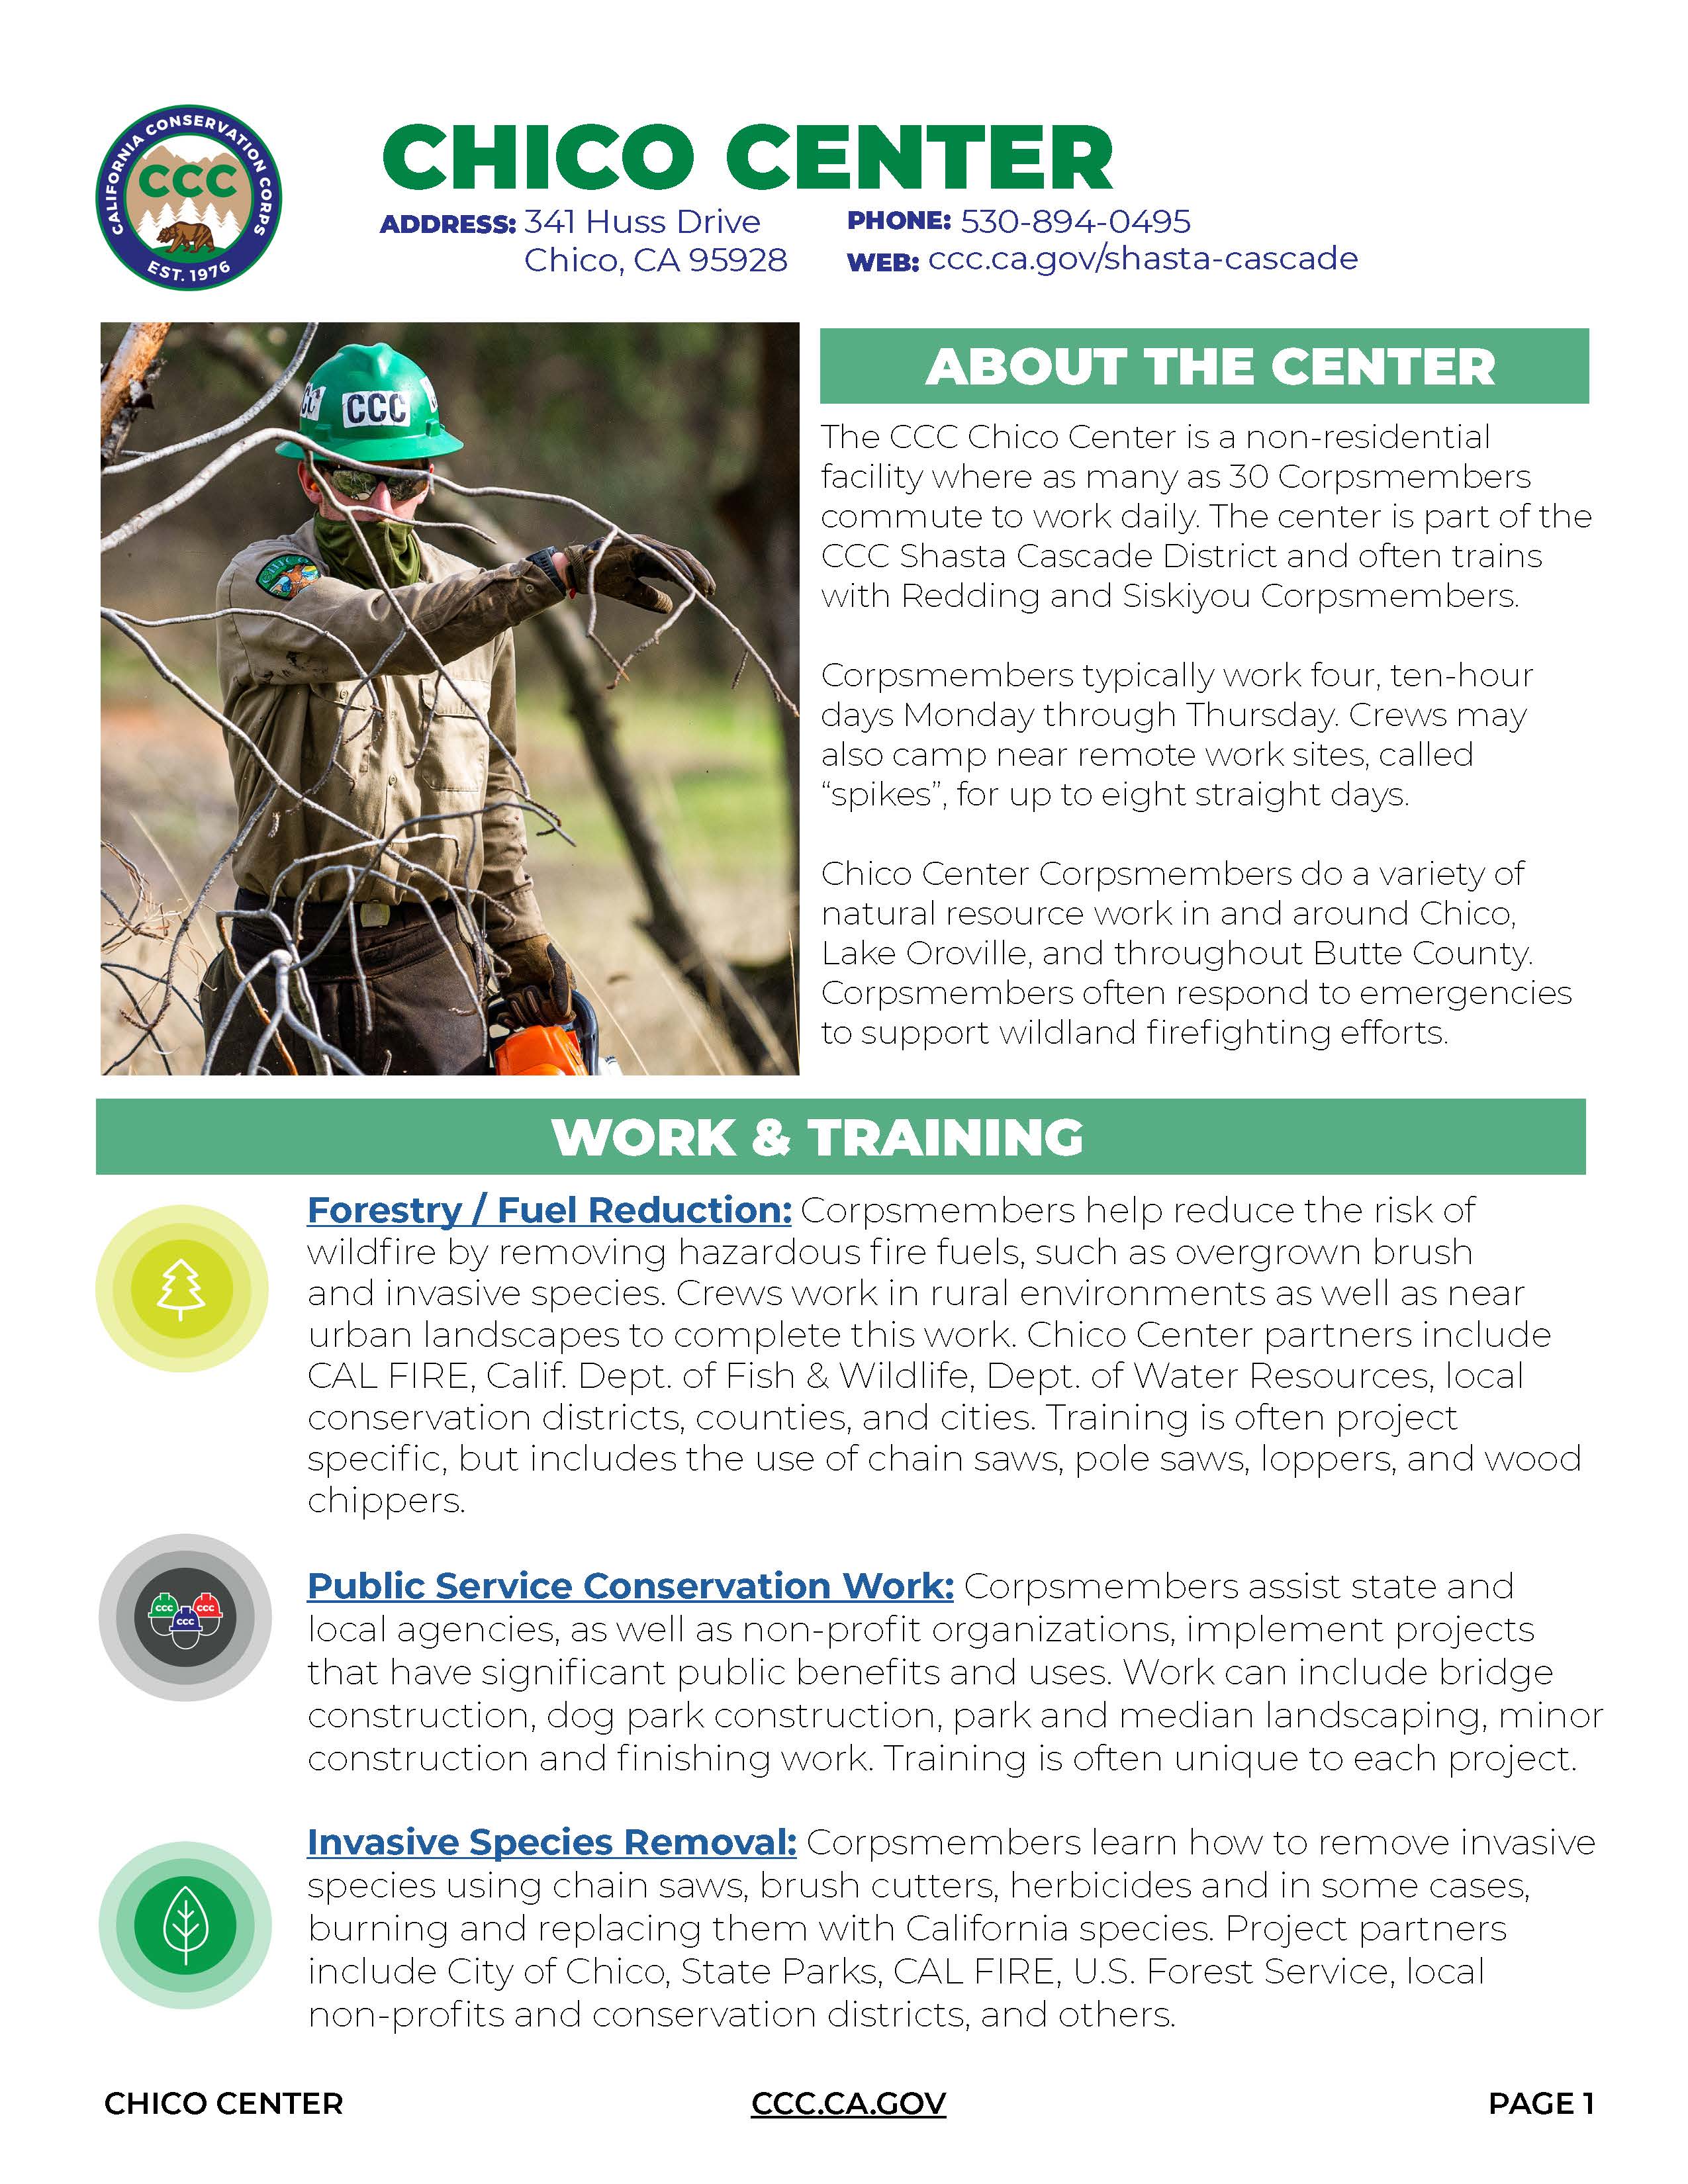 Image of Chico Center Fact Sheet